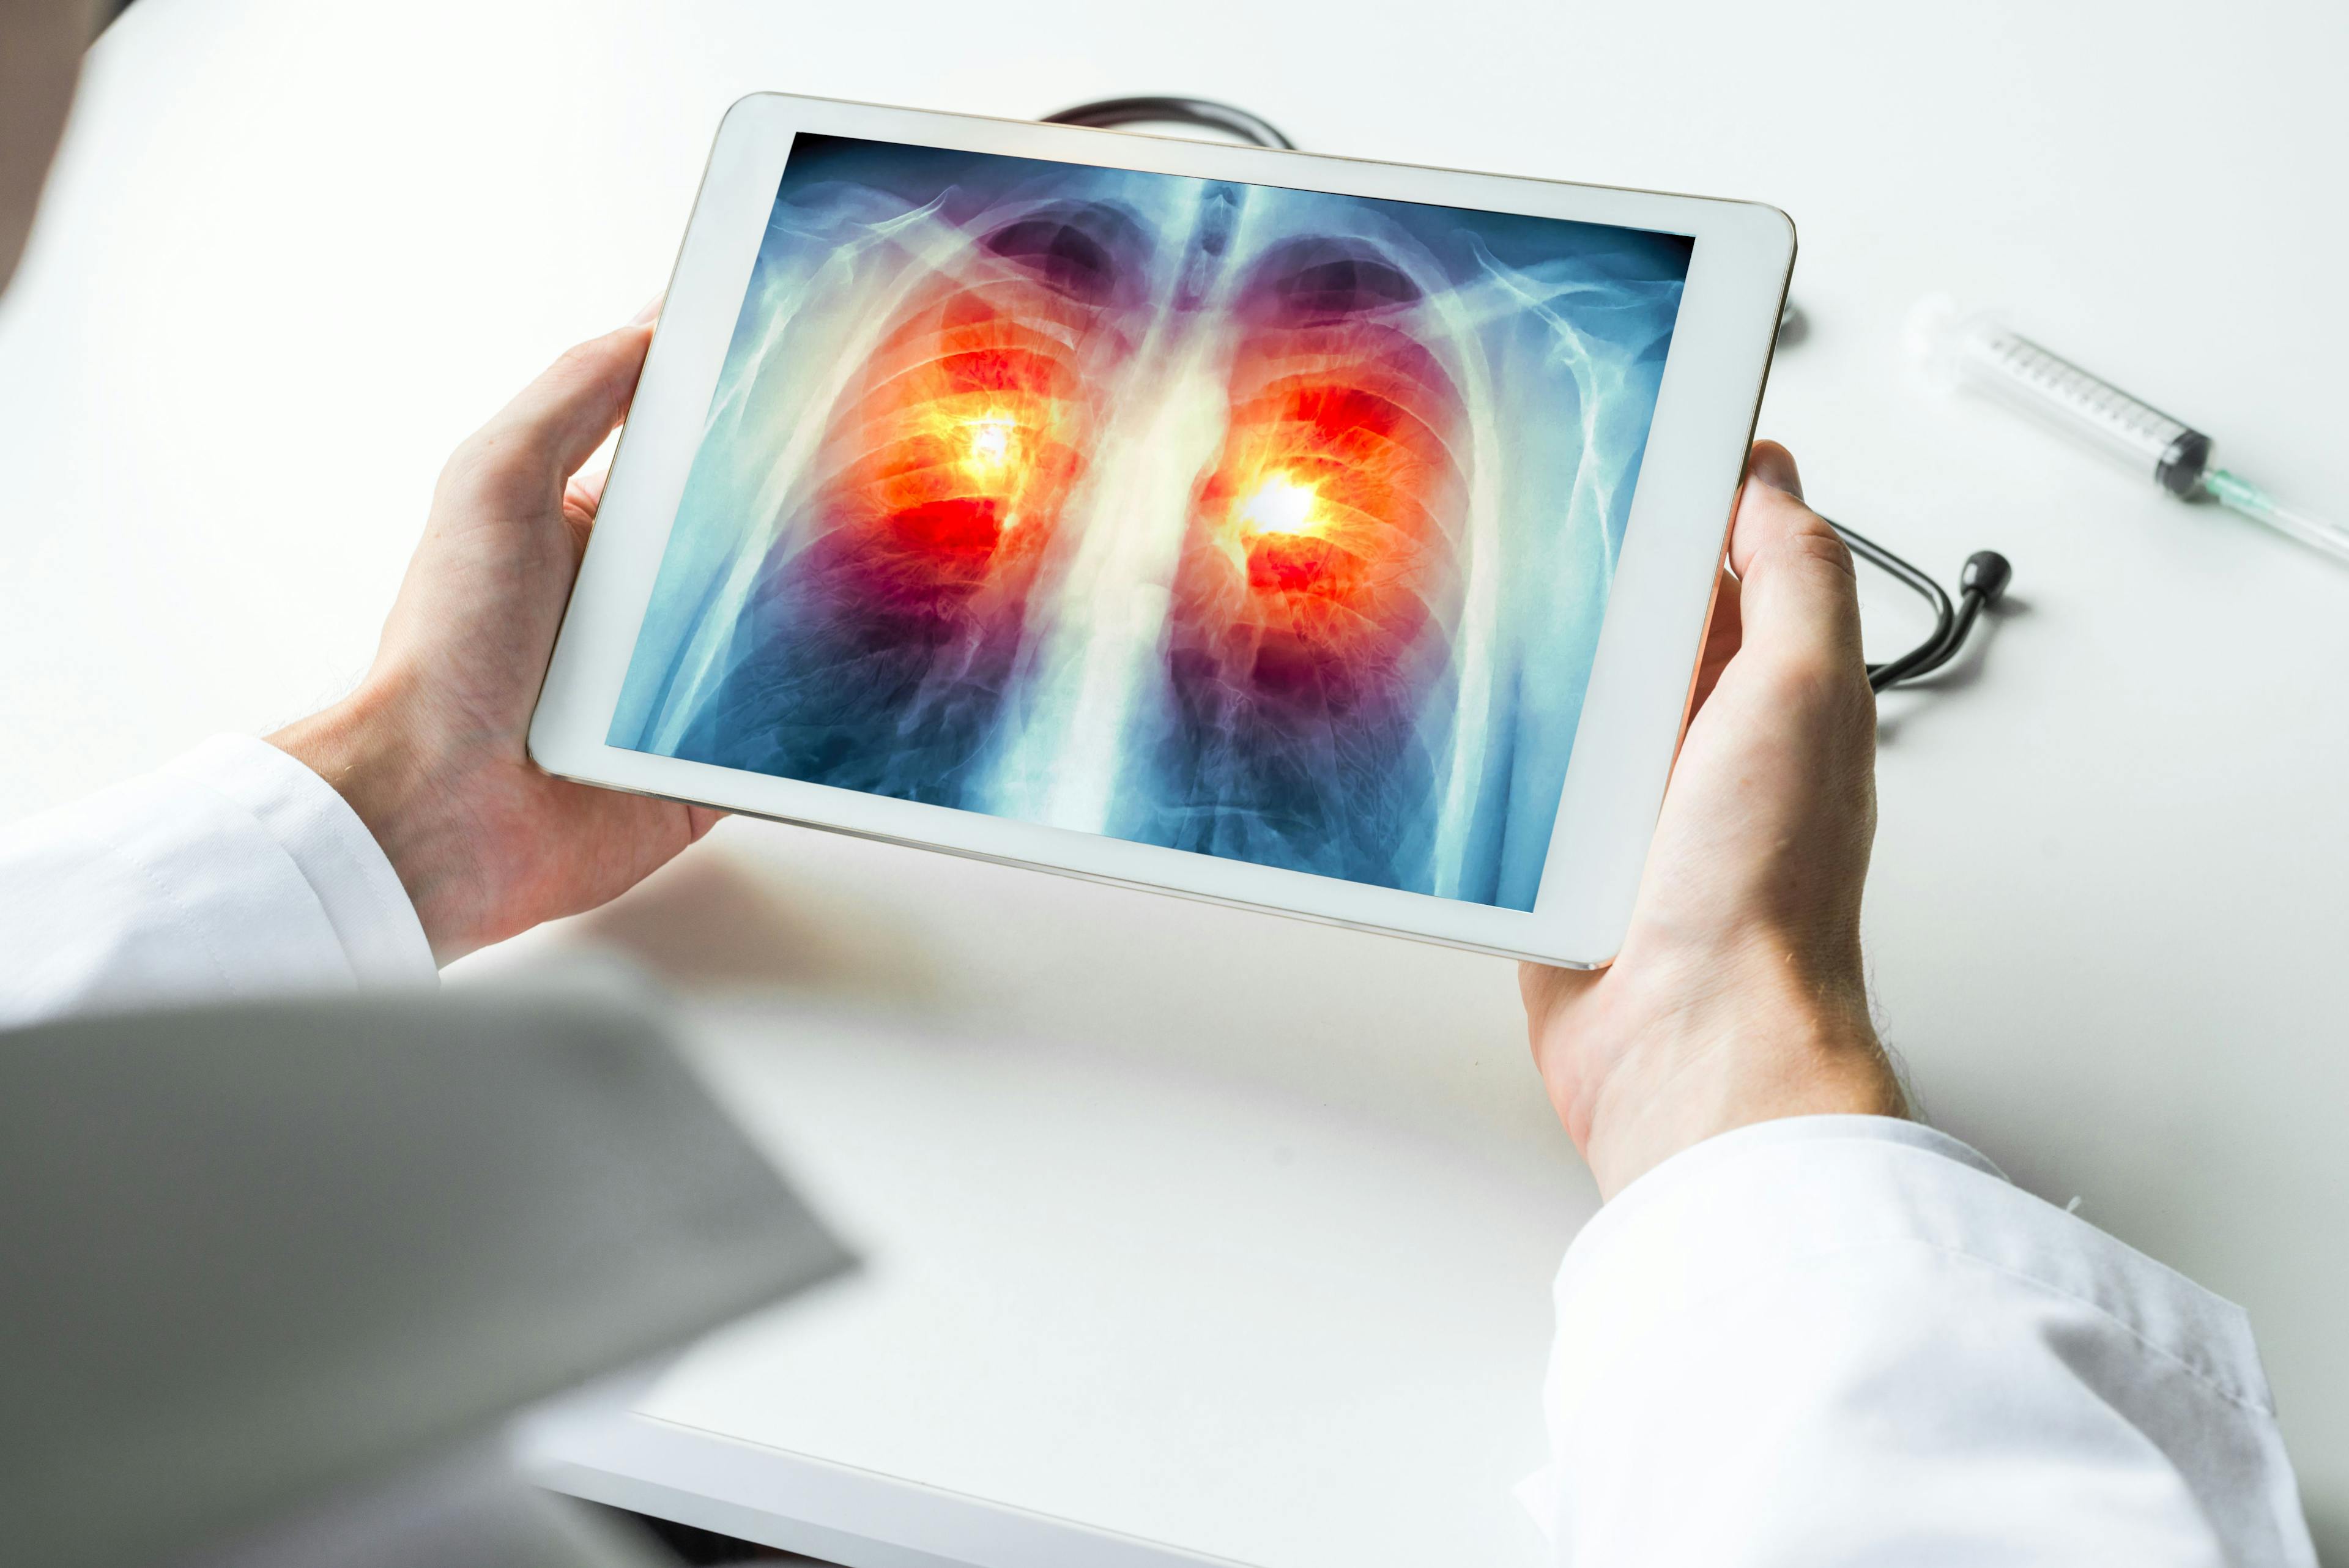 Health care professional viewing x-ray of lungs on a tablet